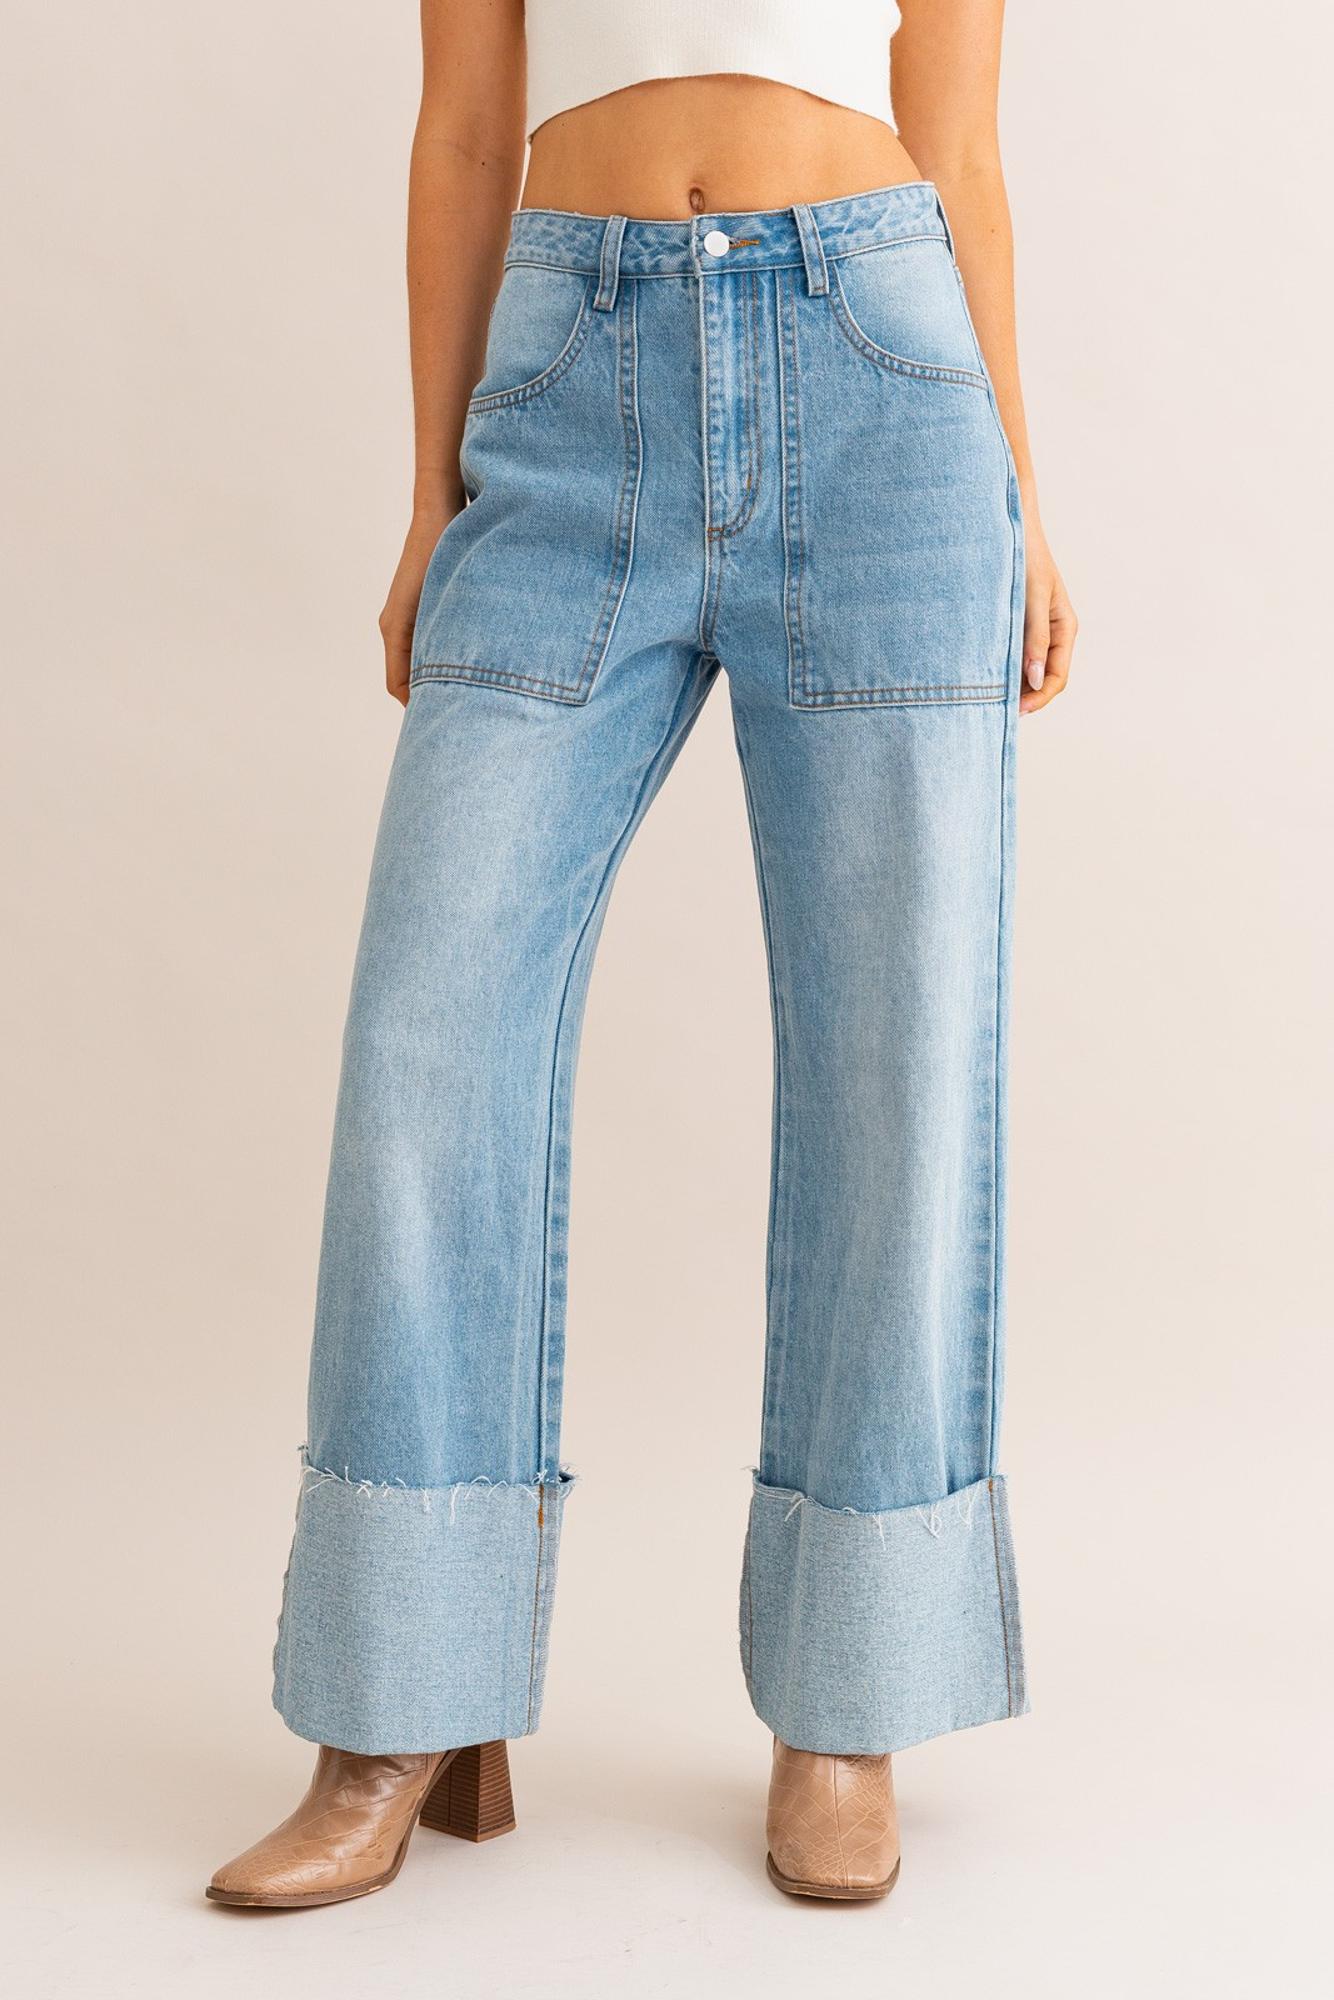 By The Fire Straight Wide Leg Jeans